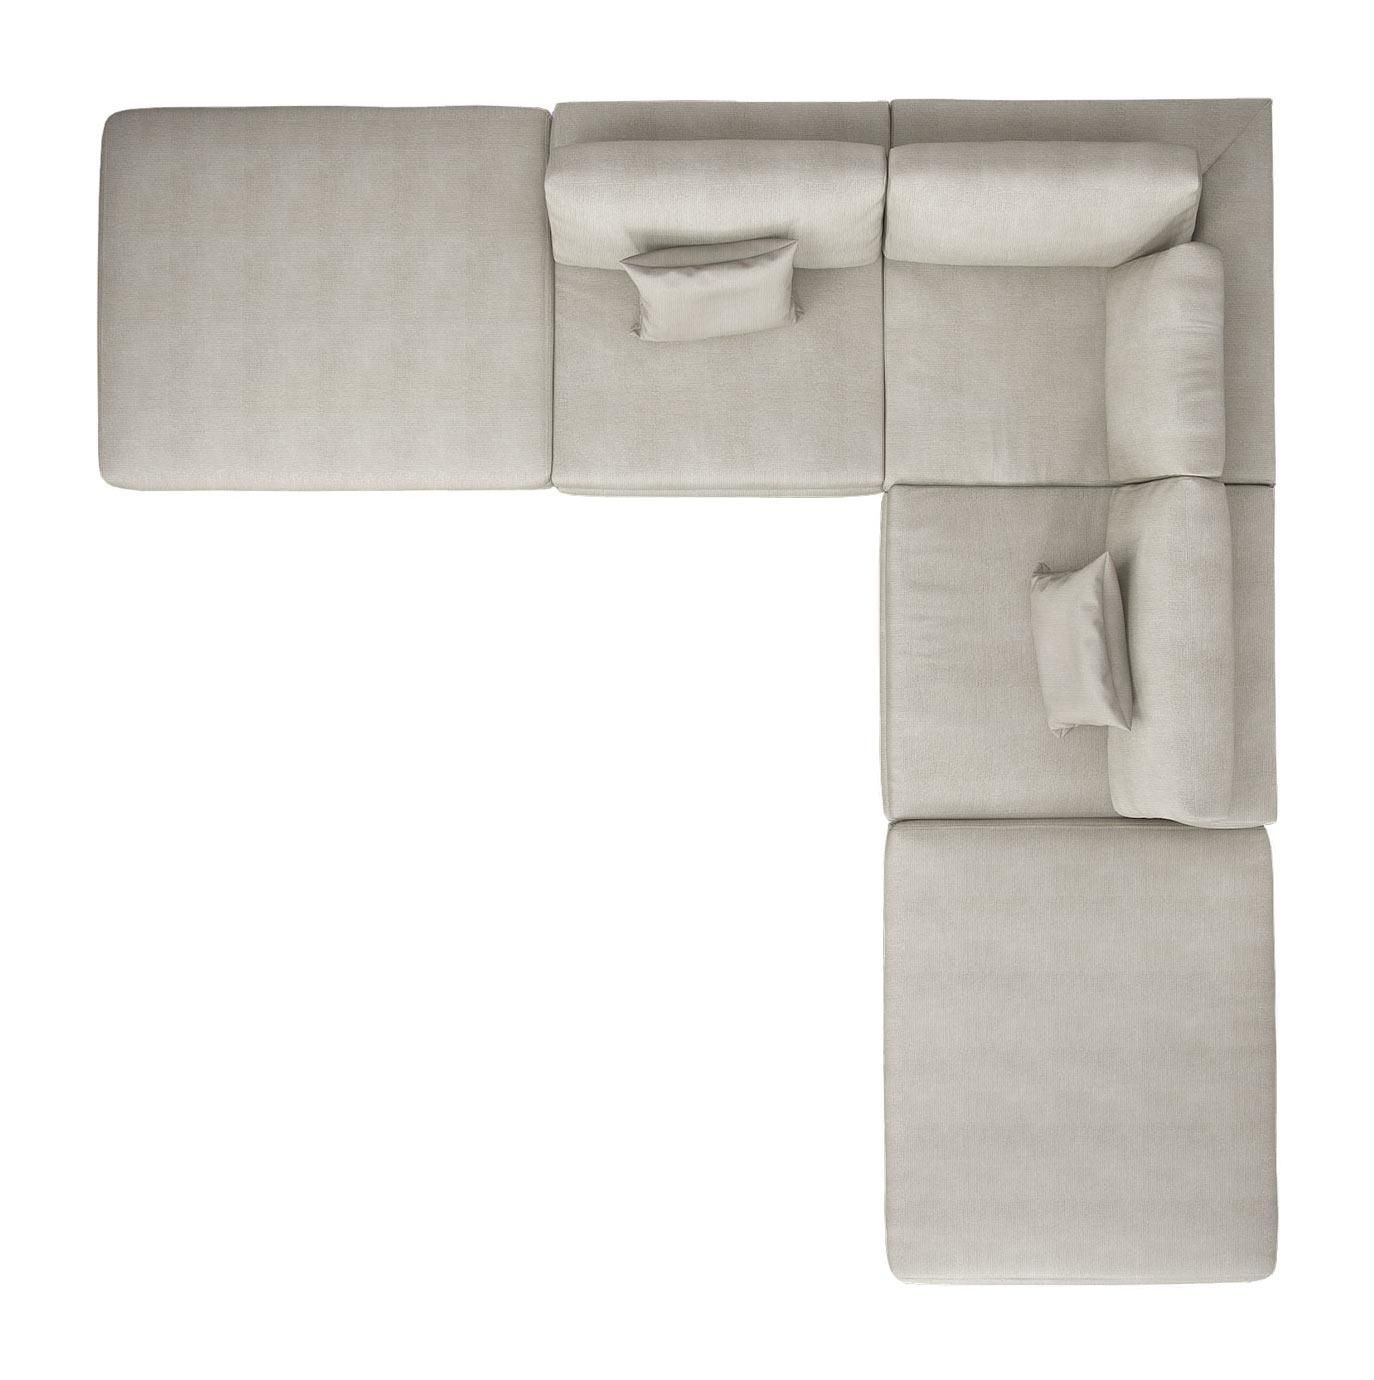 Perry Armless Corner Sectional Sofa Moonbeammodloft Intended For Armless Sectional Sofa (View 8 of 15)